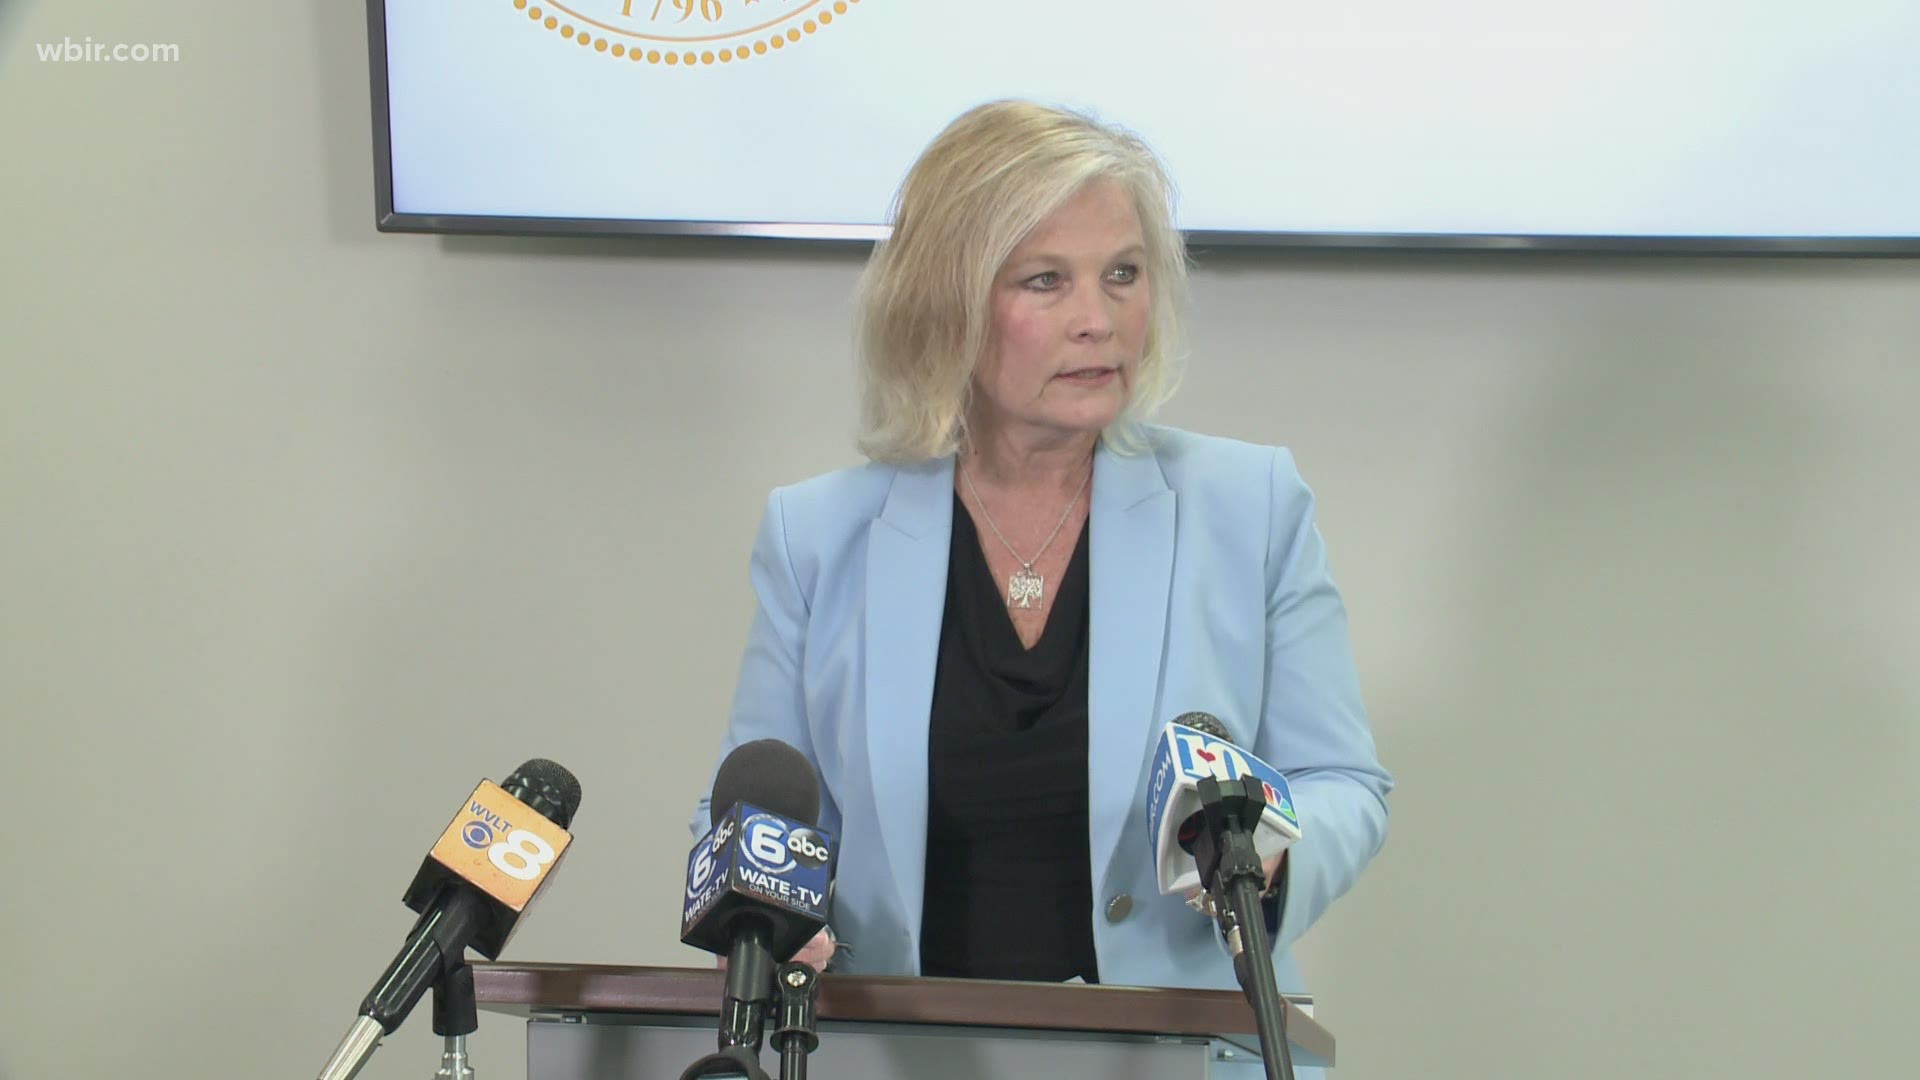 District Attorney General Charme Allen said releasing that video before every witness is interviewed and all the evidence is collected could hurt the investigation.